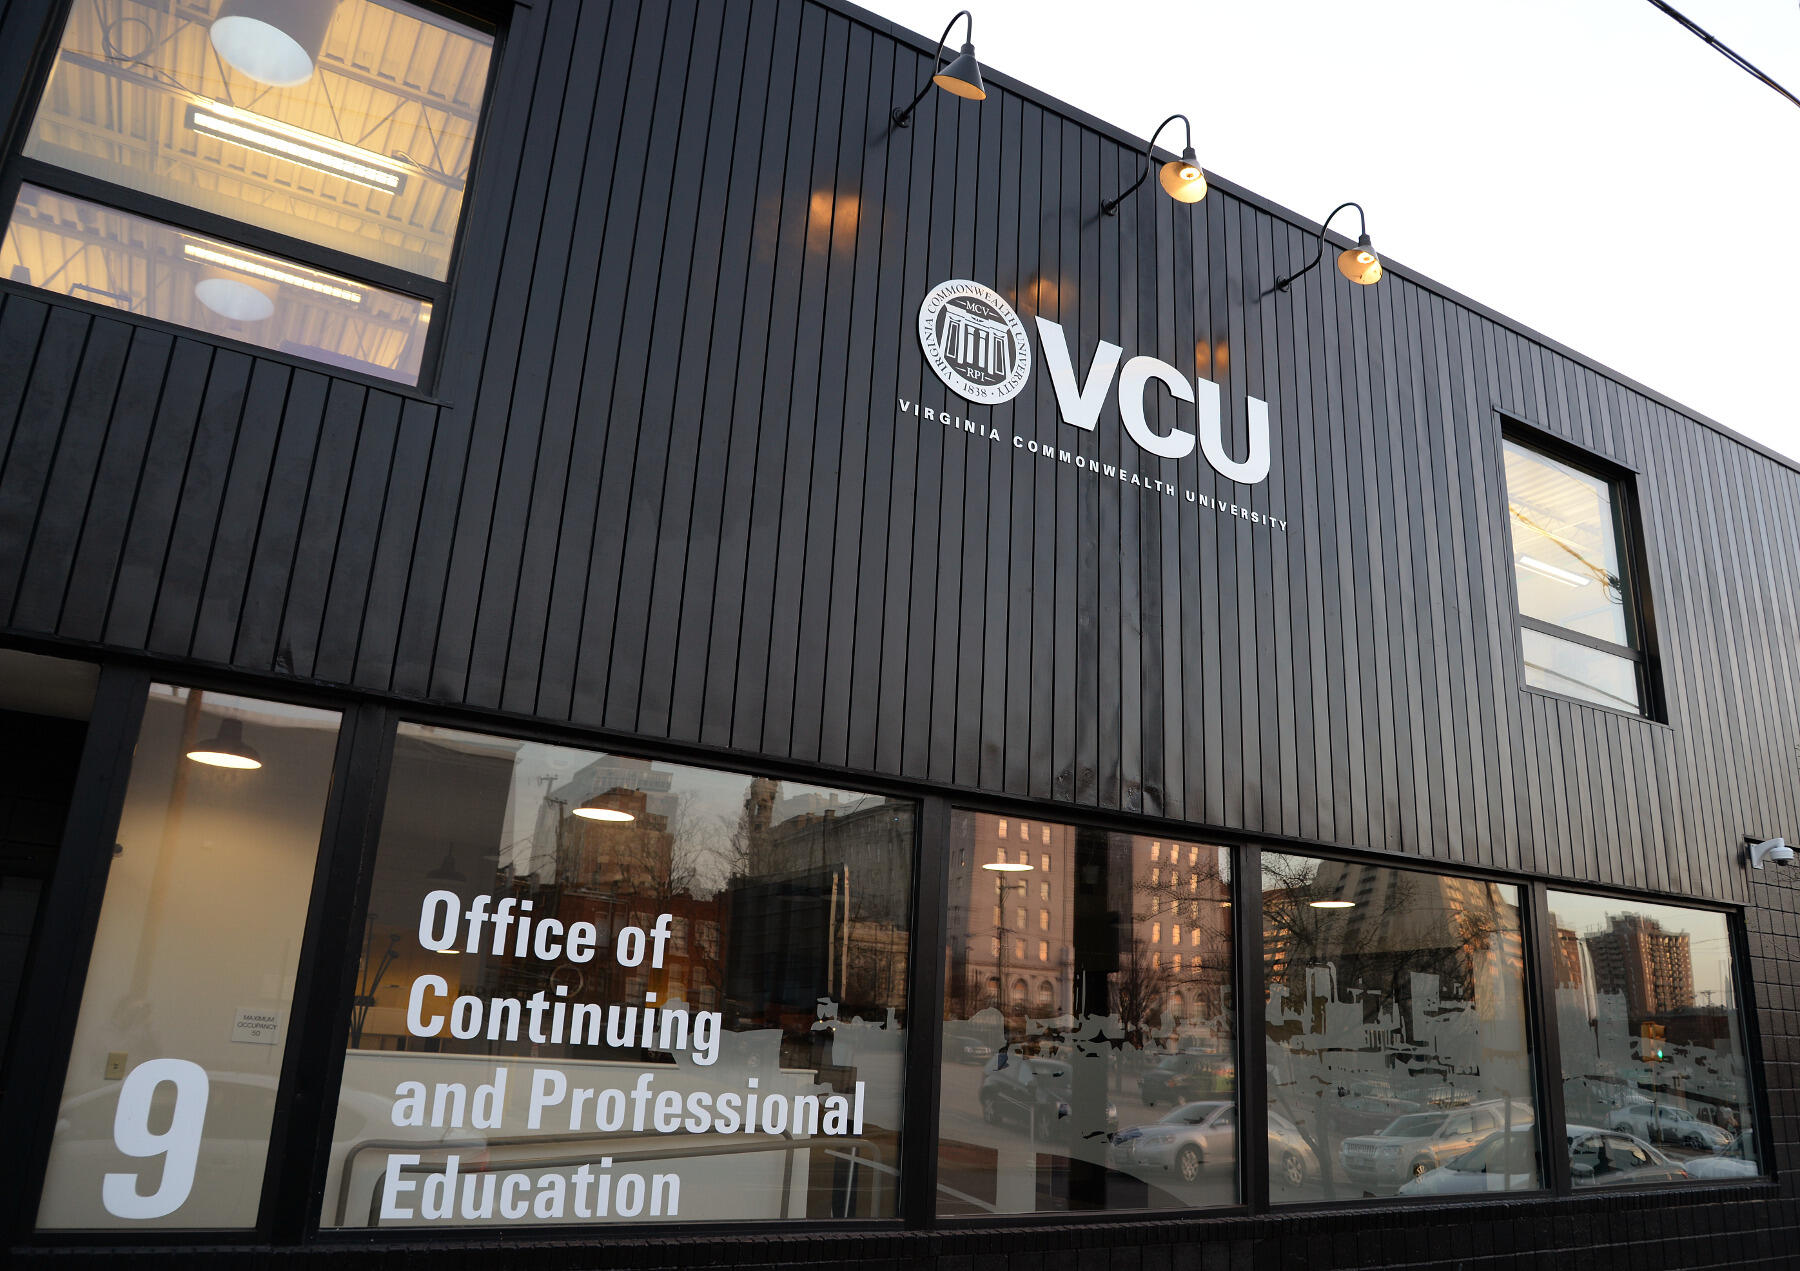 The VCU Office of Continuing and Professional Education.